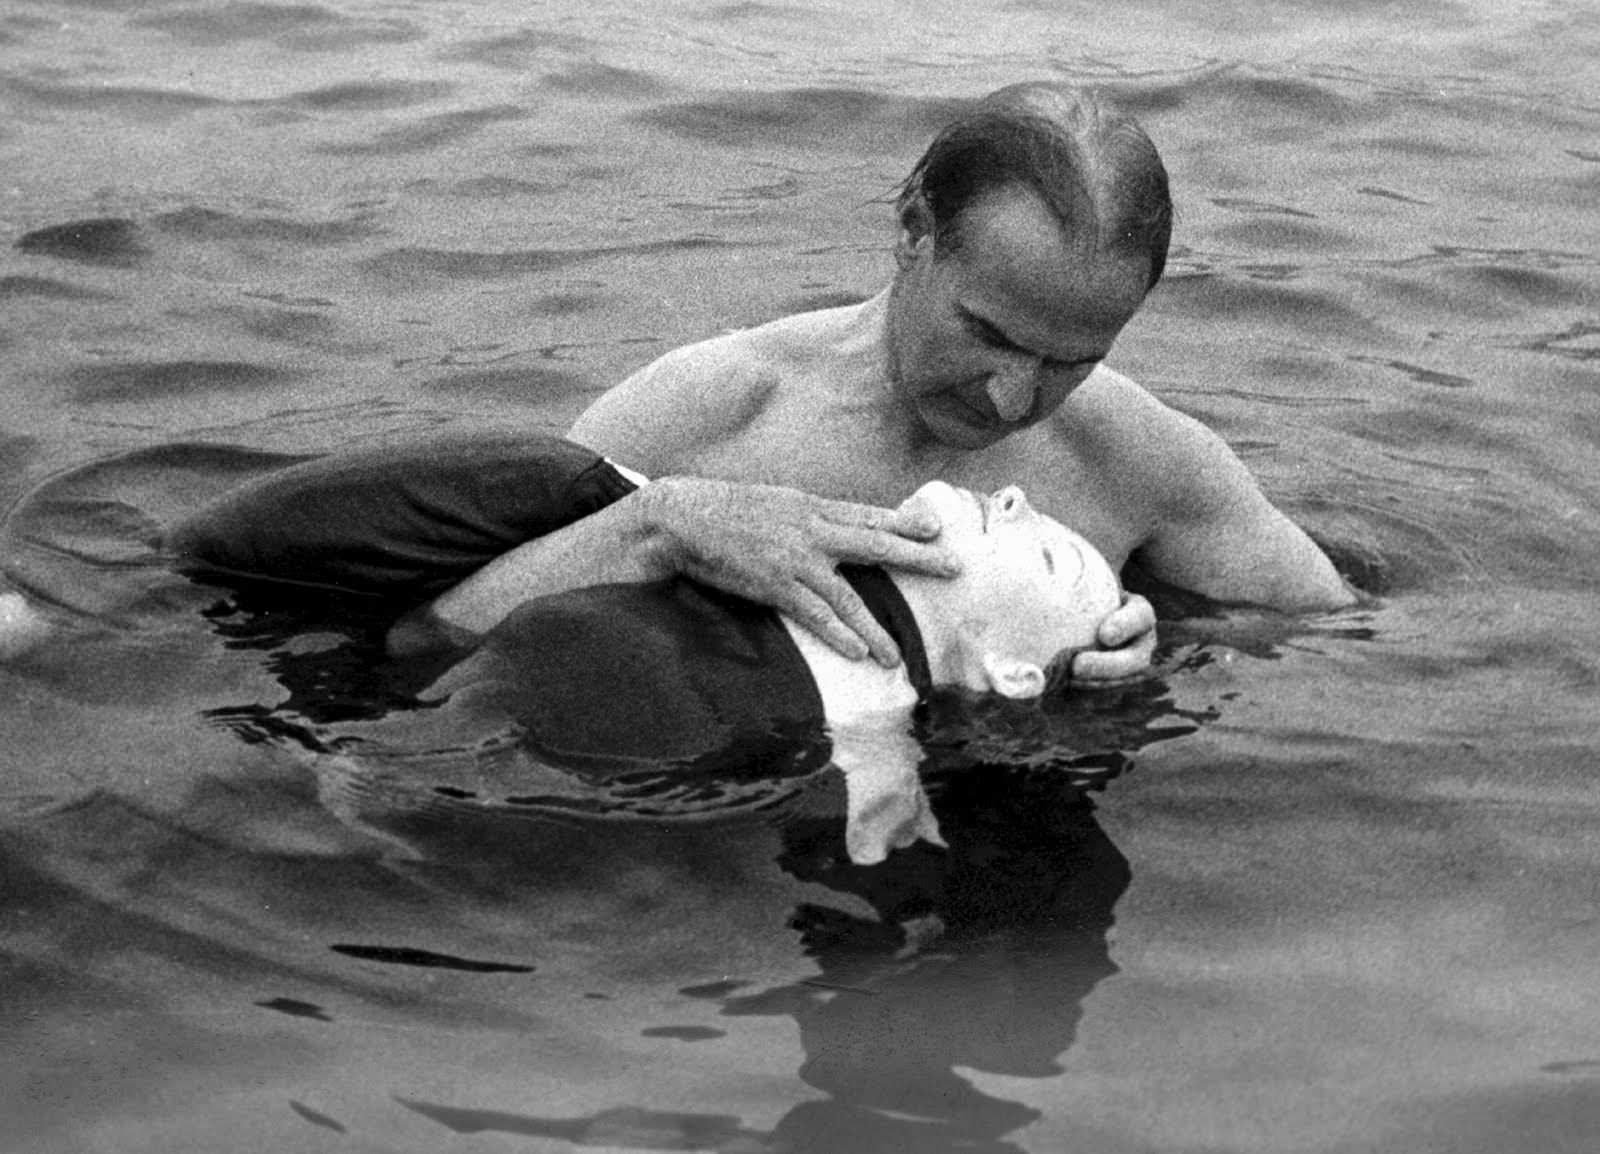 A man demonstrates how to practice with a special resuscitation mannequin in Norway in 1970. The mannequin is made by the Norwegian toy maker Åsmund S. Laerdal.